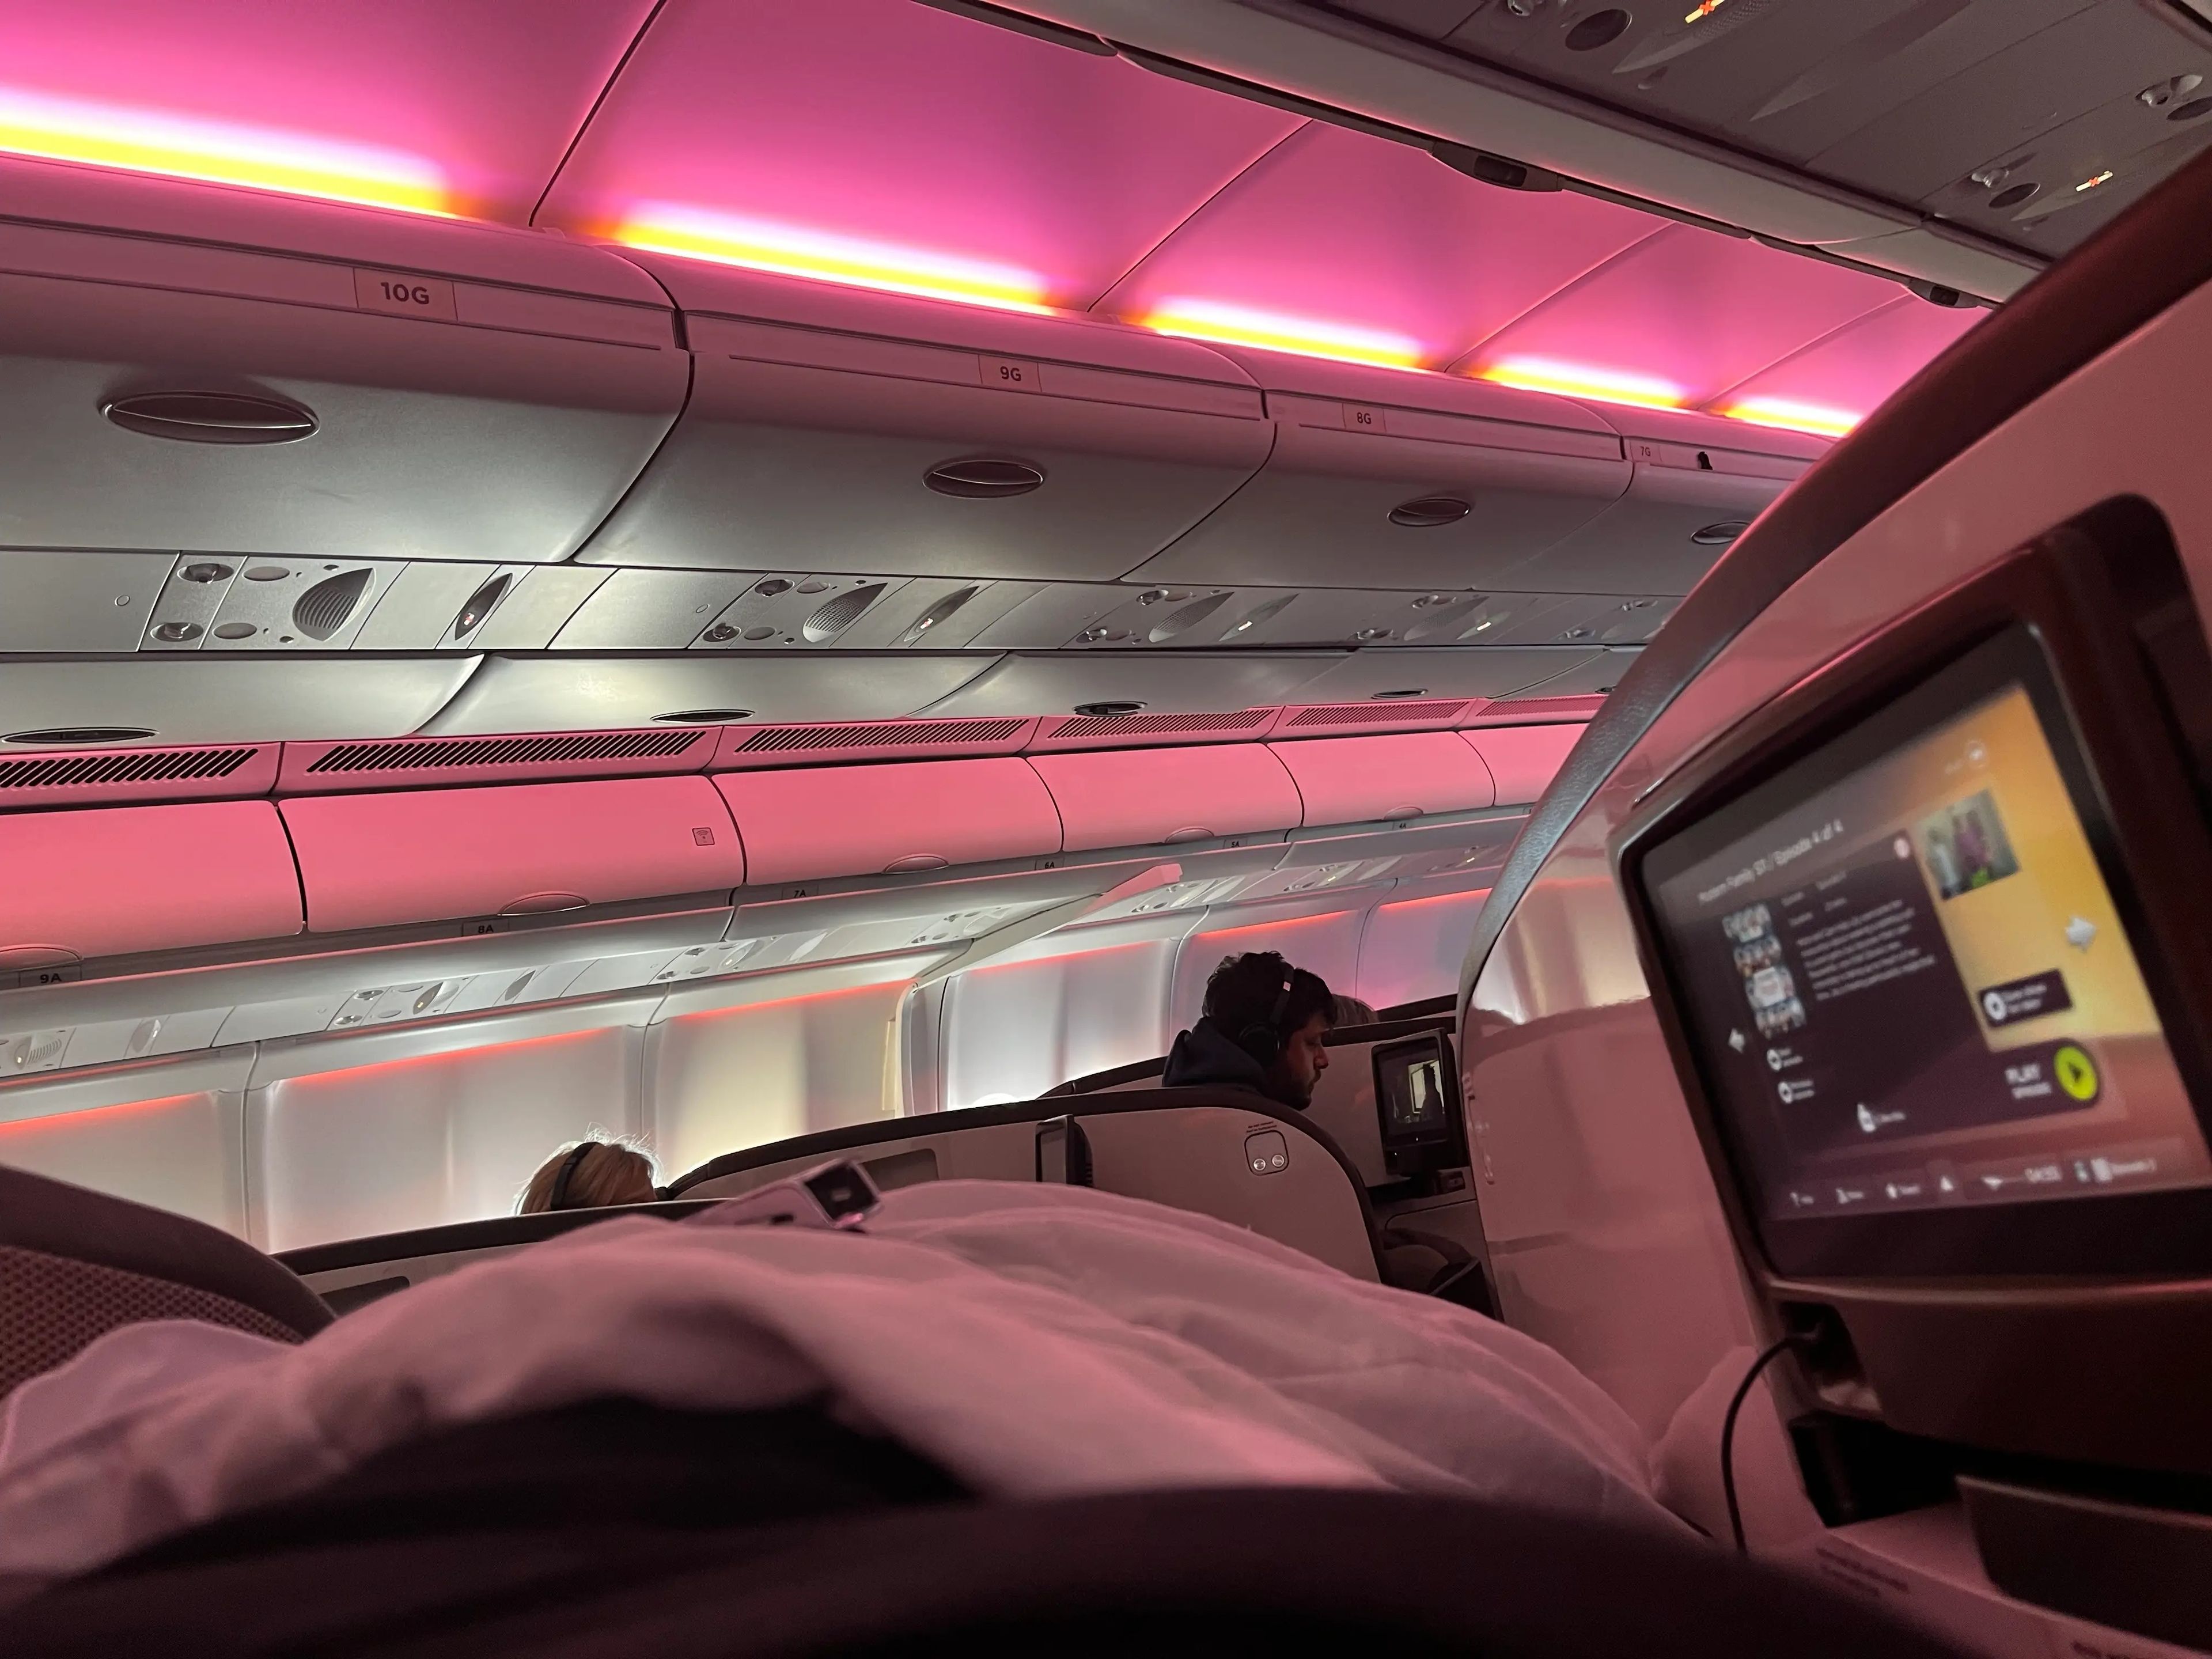 View from the writer laying flat on seat converted into bed on Virgin Atlantic flight. She can see other passengers in their seats and a screen